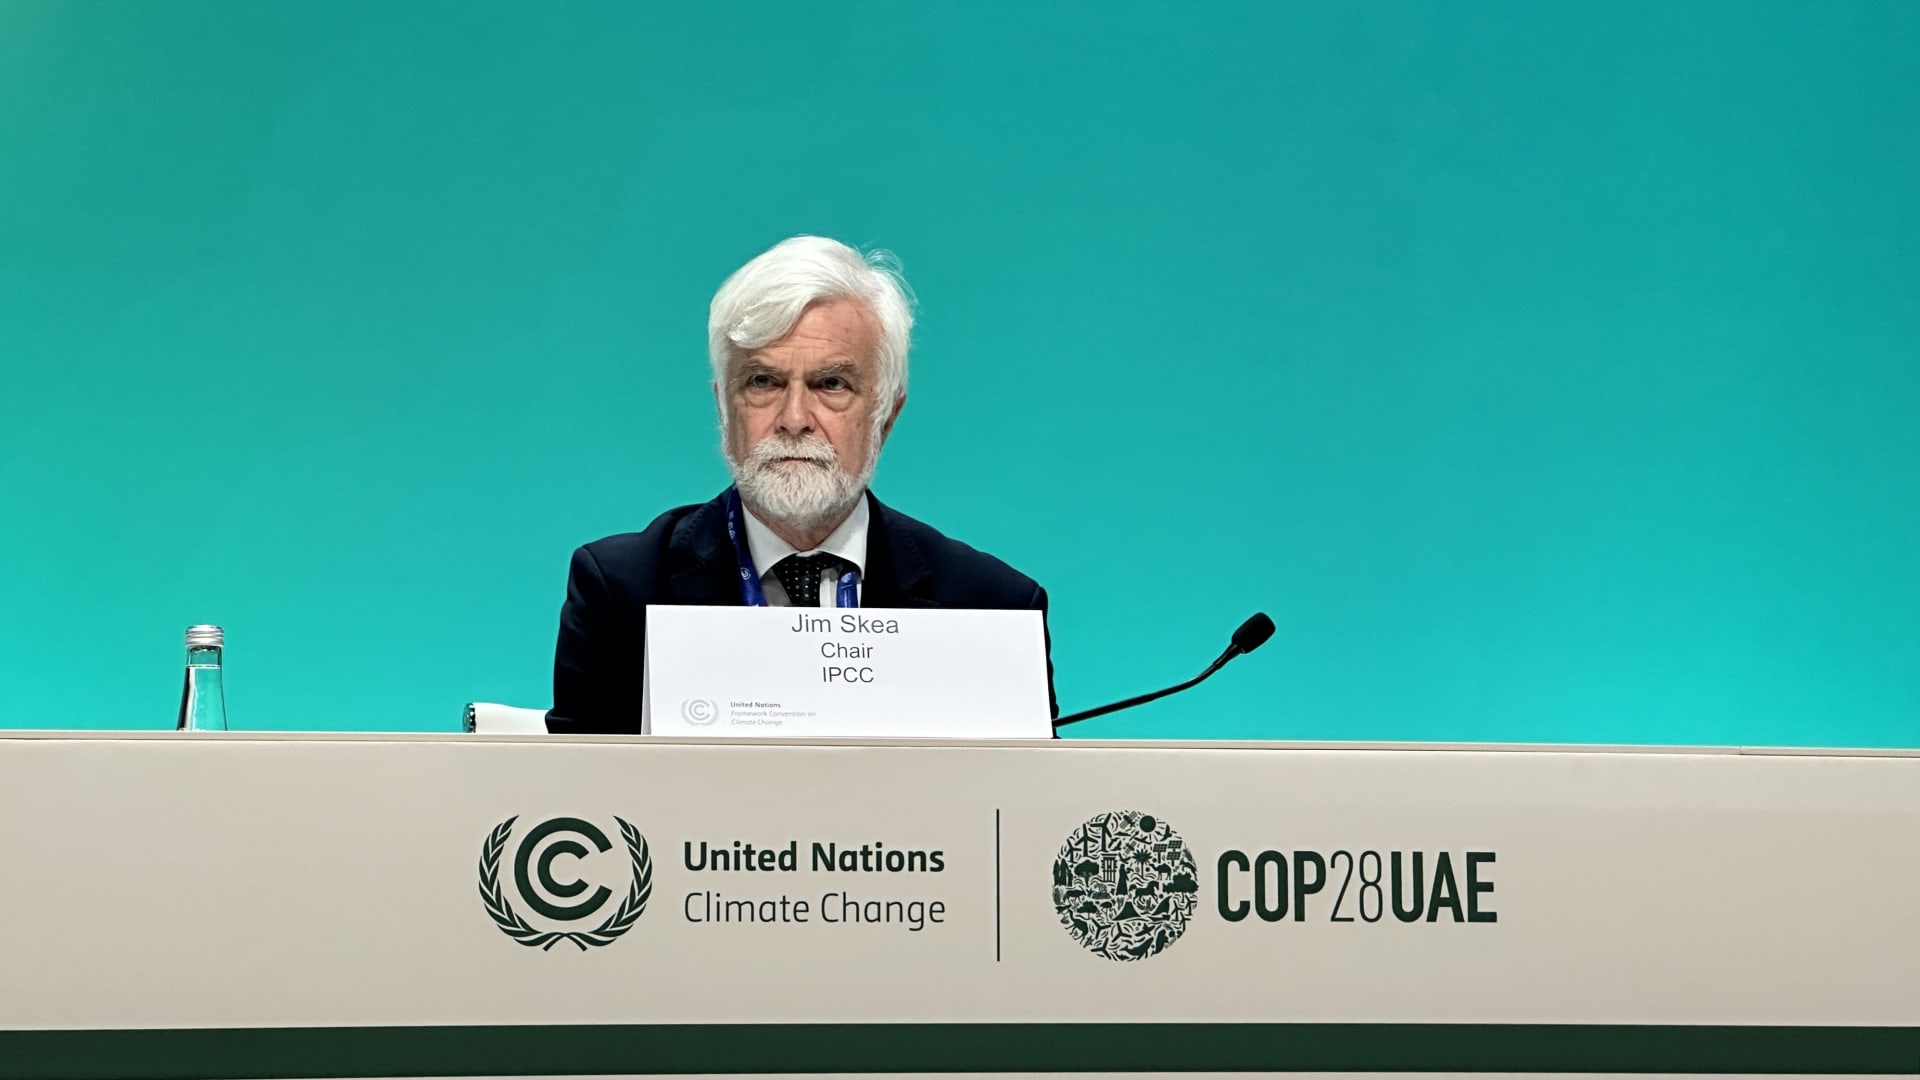 Jim Skea , chairman of the Intergovernmental Panel on Climate Change (IPCC) speaks during the 28th Conference of the Parties (COP28) to the UN Framework Convention on Climate Change (UNFCCC) at the Expo City Dubai in Dubai, United Arab Emirates on Dec. 4, 2023.